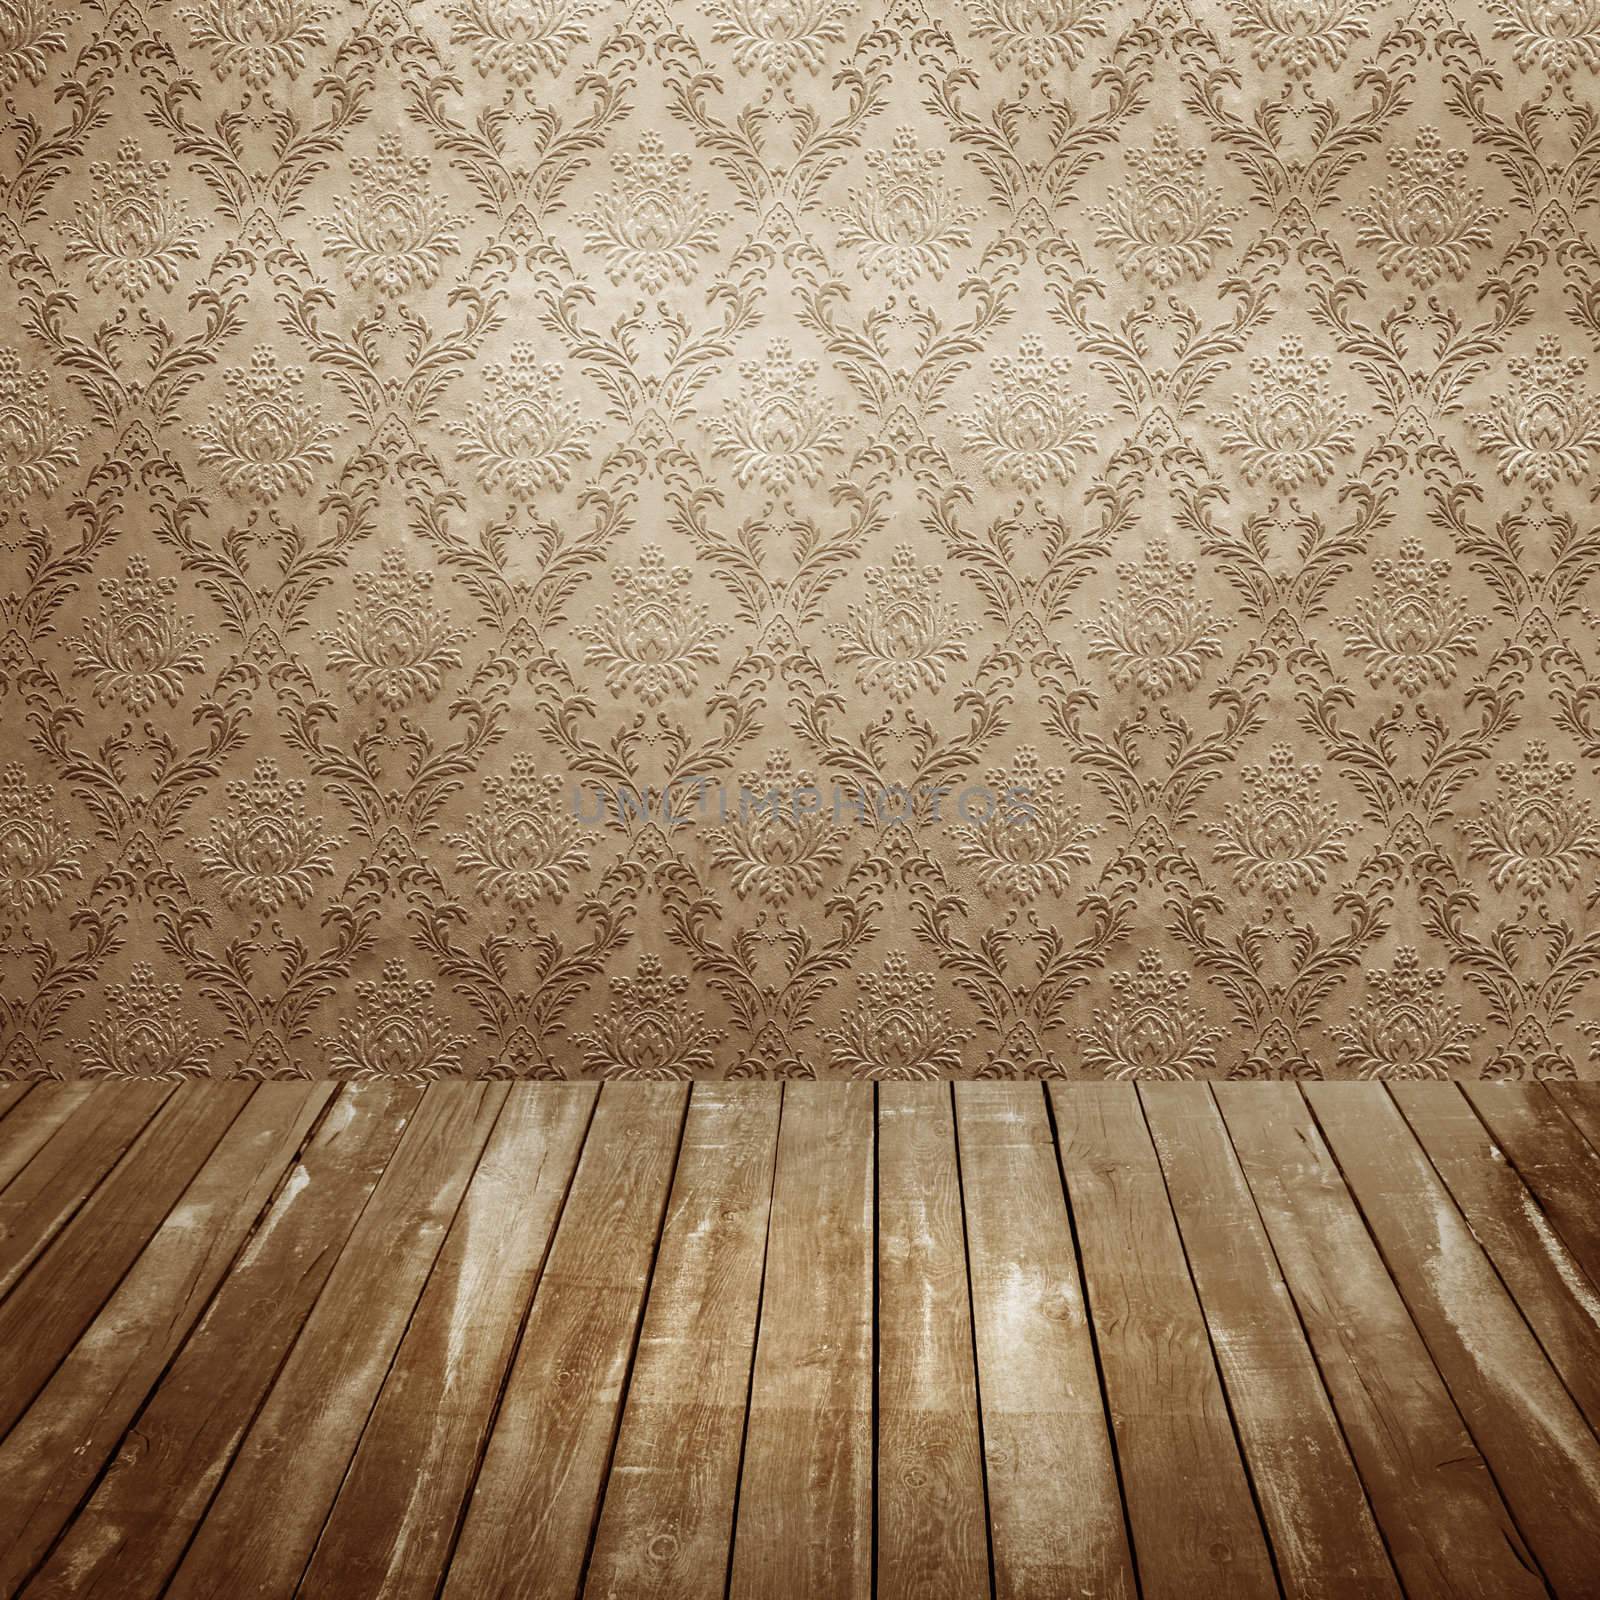 room with wooden floors and old wallpaper